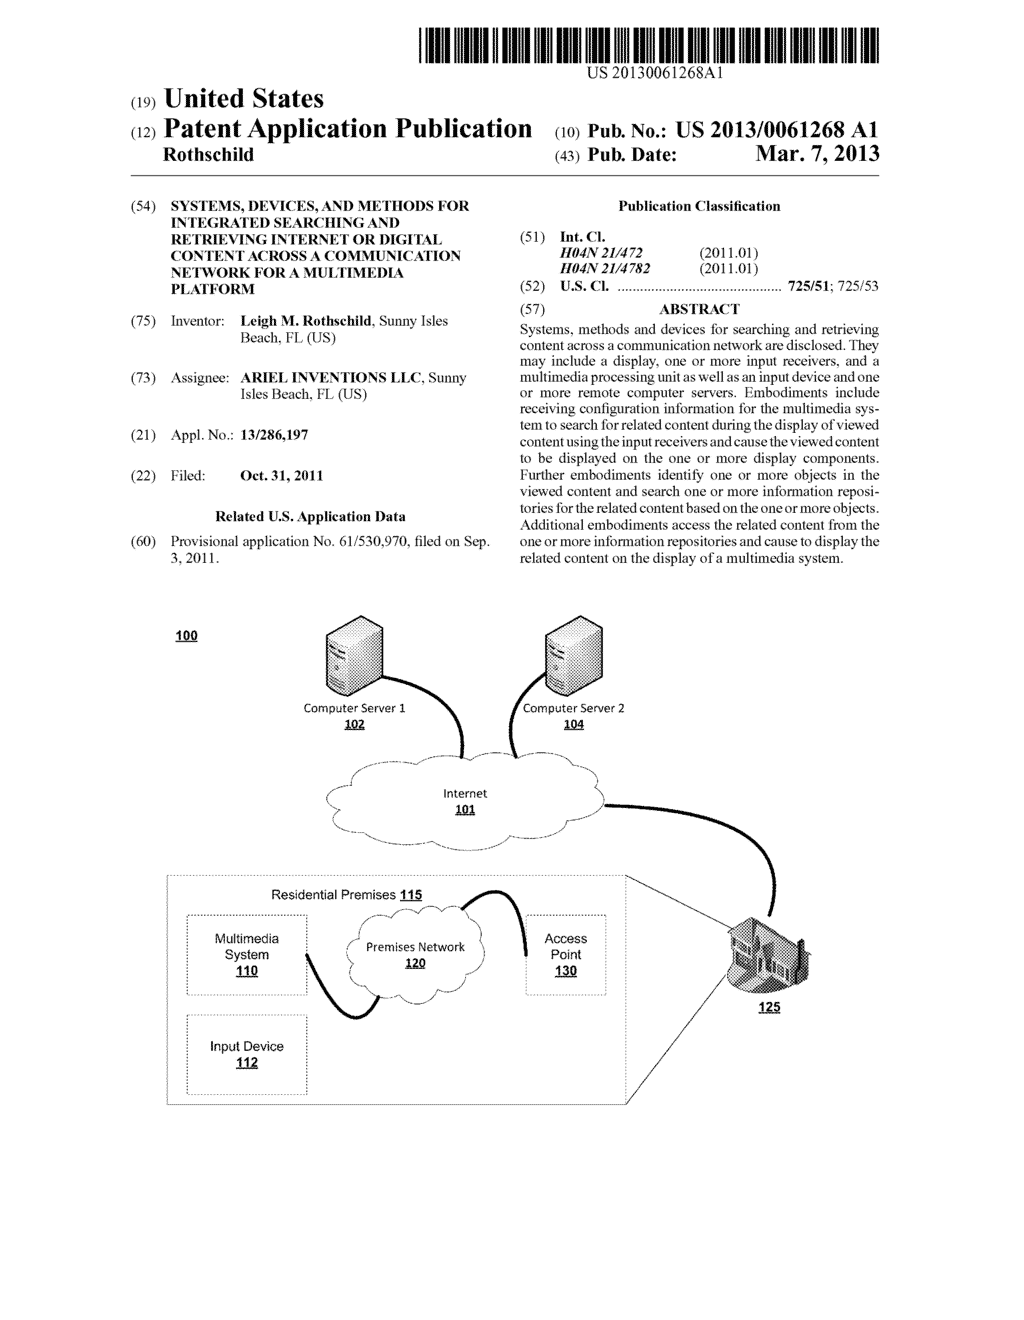 SYSTEMS, DEVICES, AND METHODS FOR INTEGRATED SEARCHING AND RETRIEVING     INTERNET OR DIGITAL CONTENT ACROSS A COMMUNICATION NETWORK FOR A     MULTIMEDIA PLATFORM - diagram, schematic, and image 01